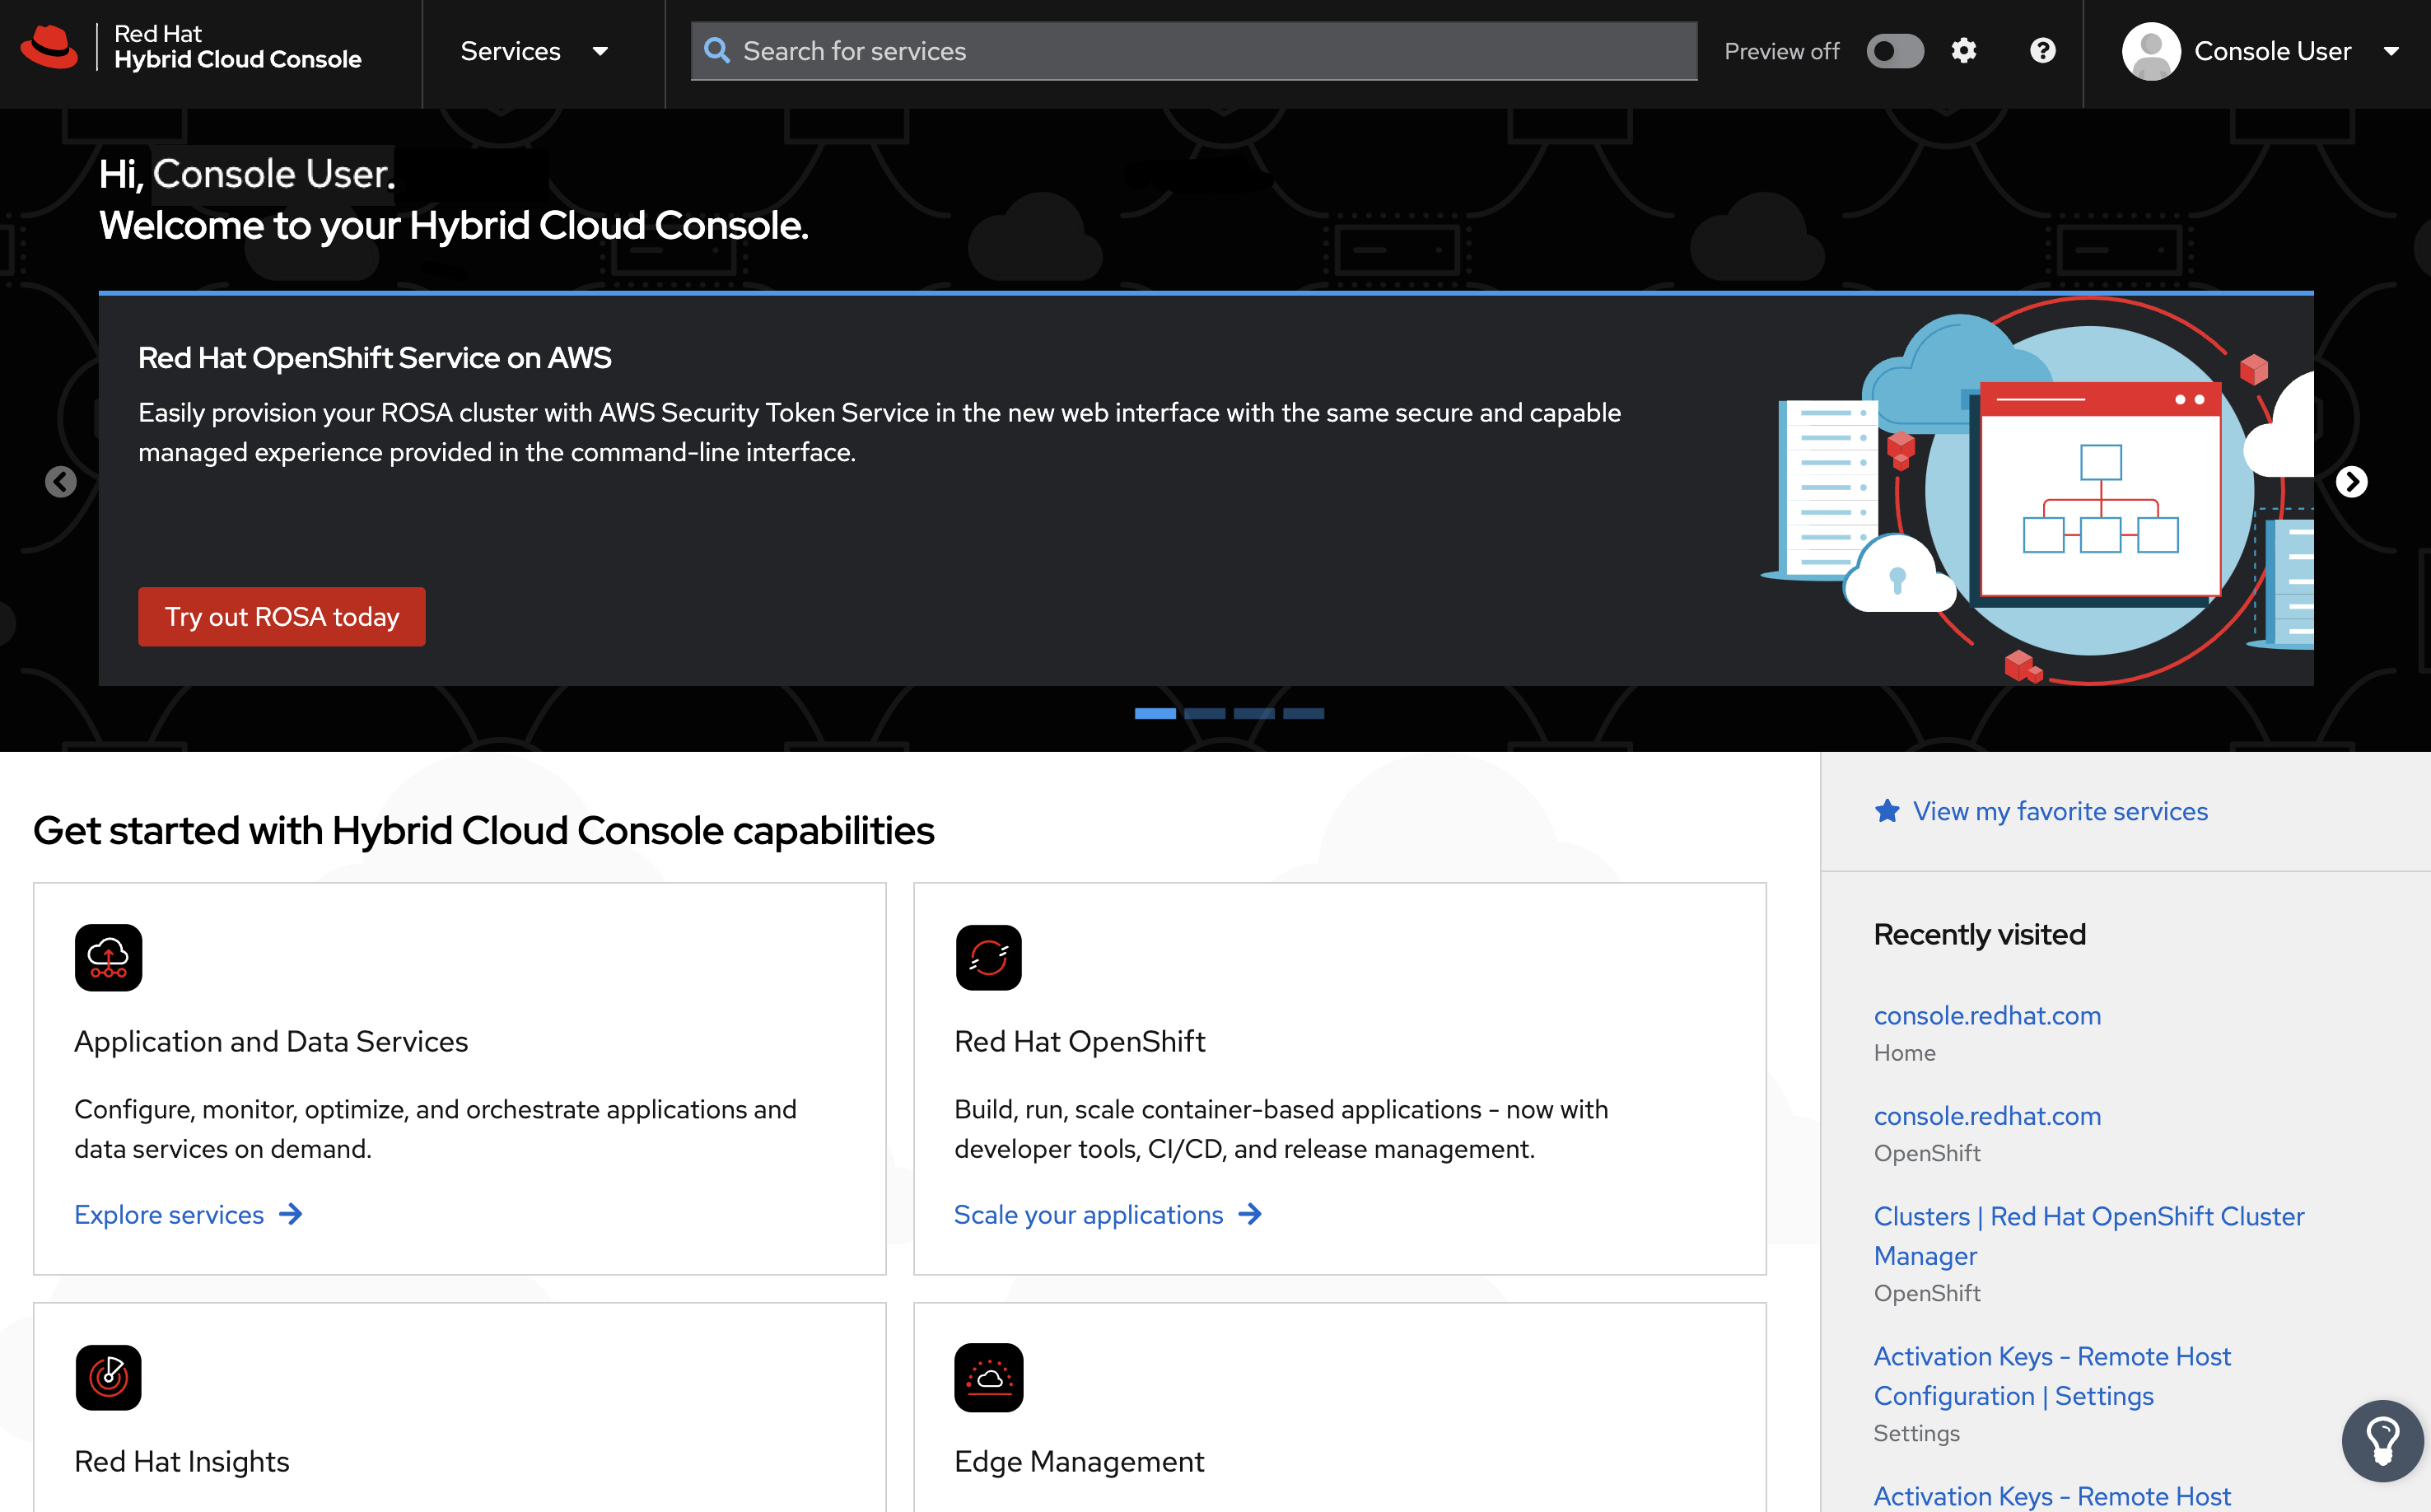 Screen shot of the Hybrid Cloud Console home page